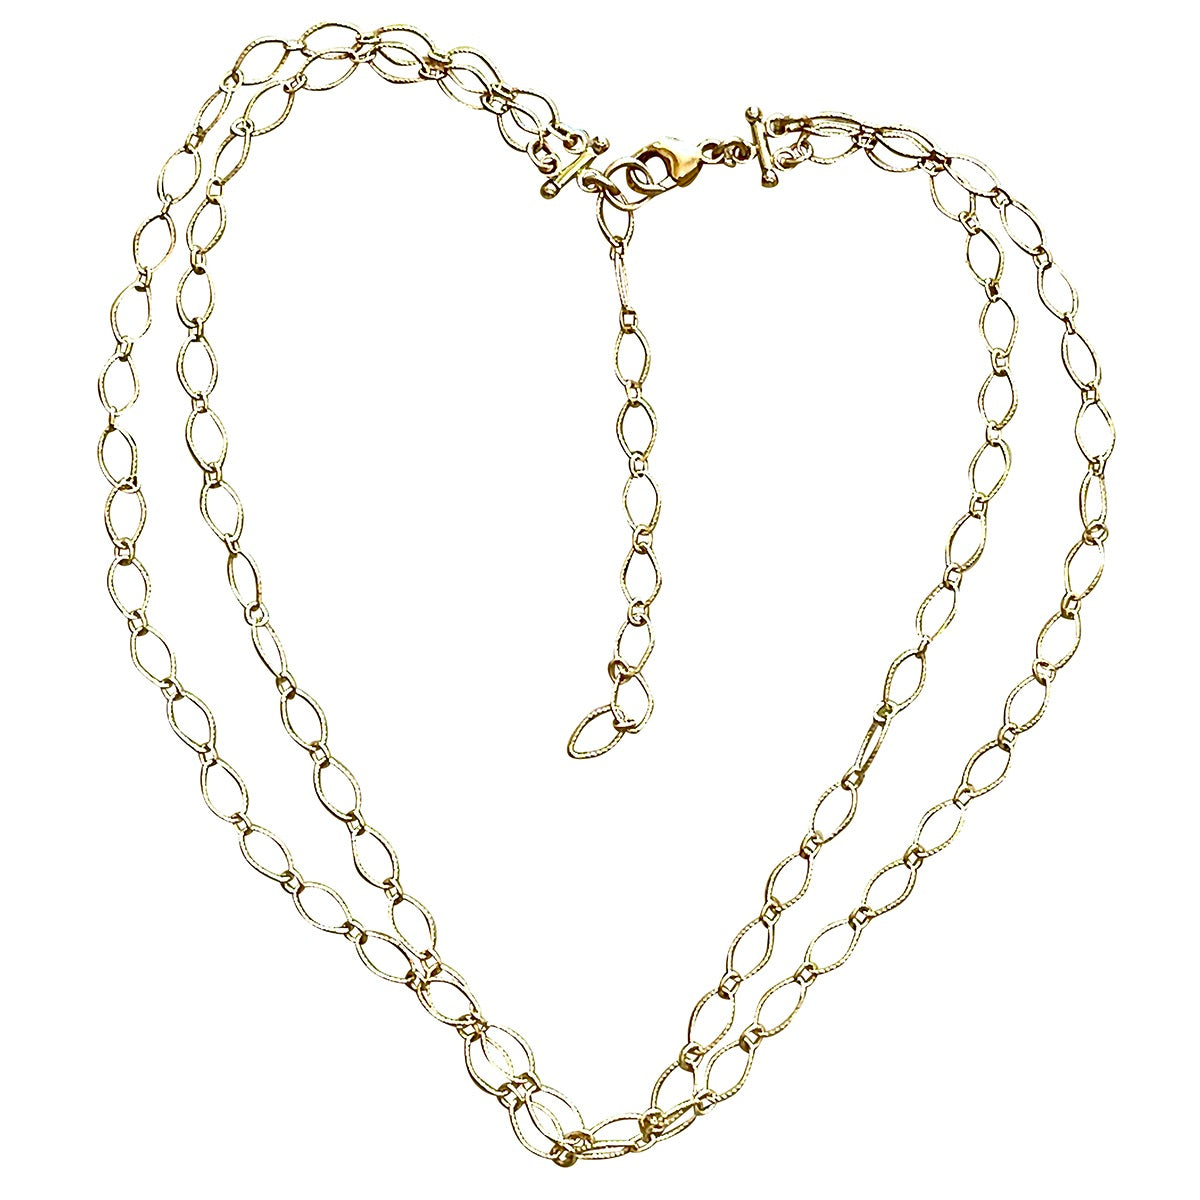 Double Strand Marquise Link Chain Choker Necklace in 14K Yellow Gold Filled / Arpaia